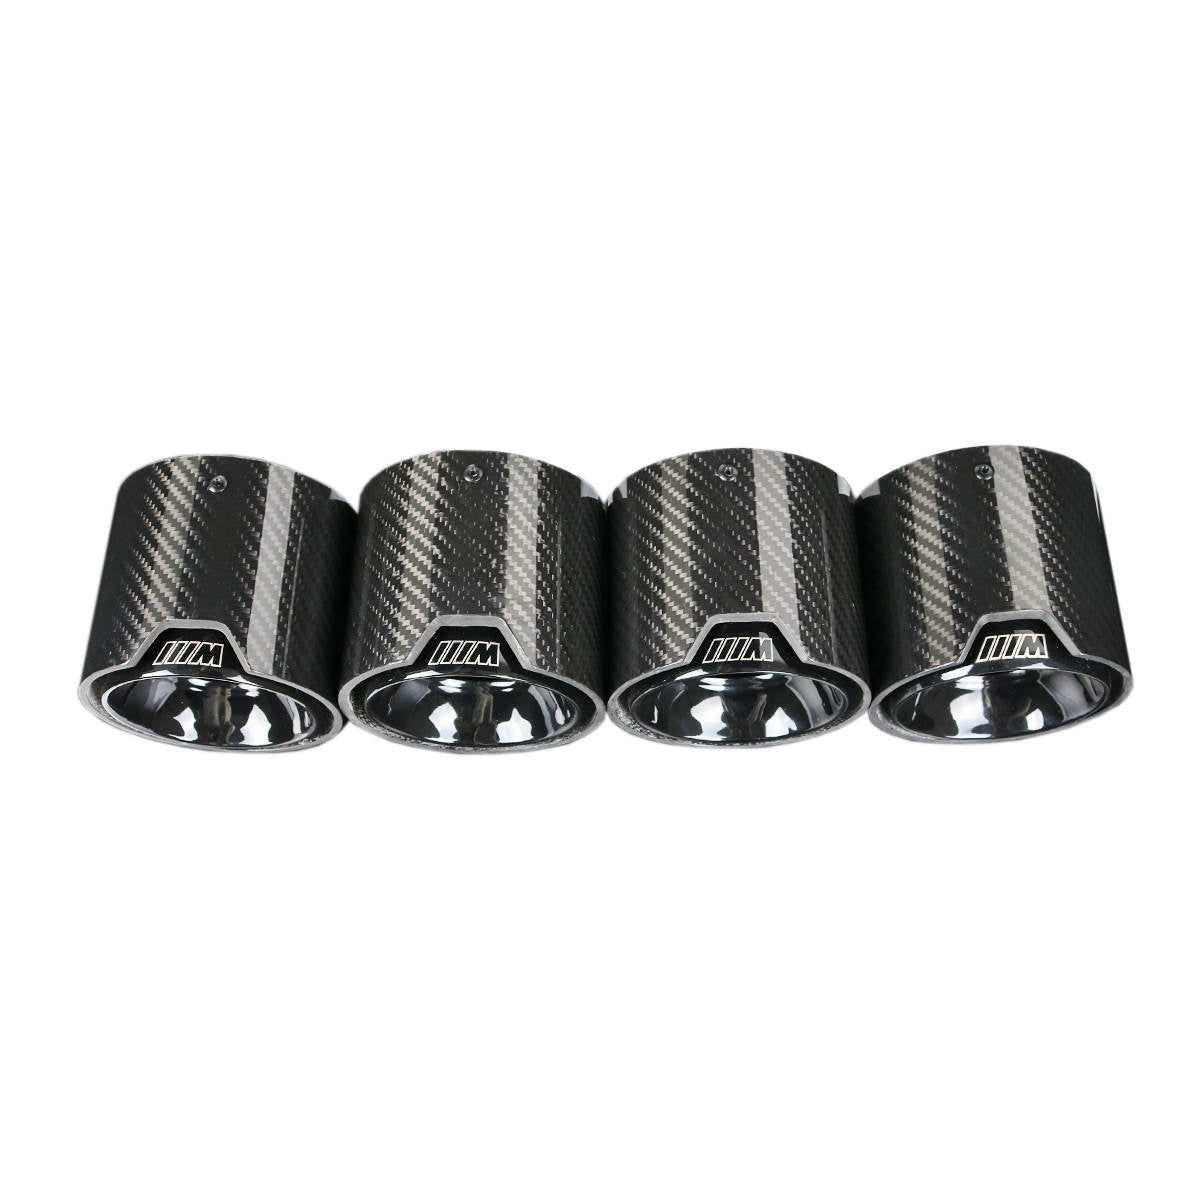 Introducing the ultimate finishing touch for your BMW: the Twenty Two Tuning Black BMW M Performance G8X Carbon Fiber Exhaust Tips. These sleek and stylish tips are designed to enhance the character of your BMW, exuding motorsport enthusiasm with their carbon fiber construction. The glossy carbon outer shell is contoured to reveal an engraved "M" logo, while the inner tip is perforated for added design flair.